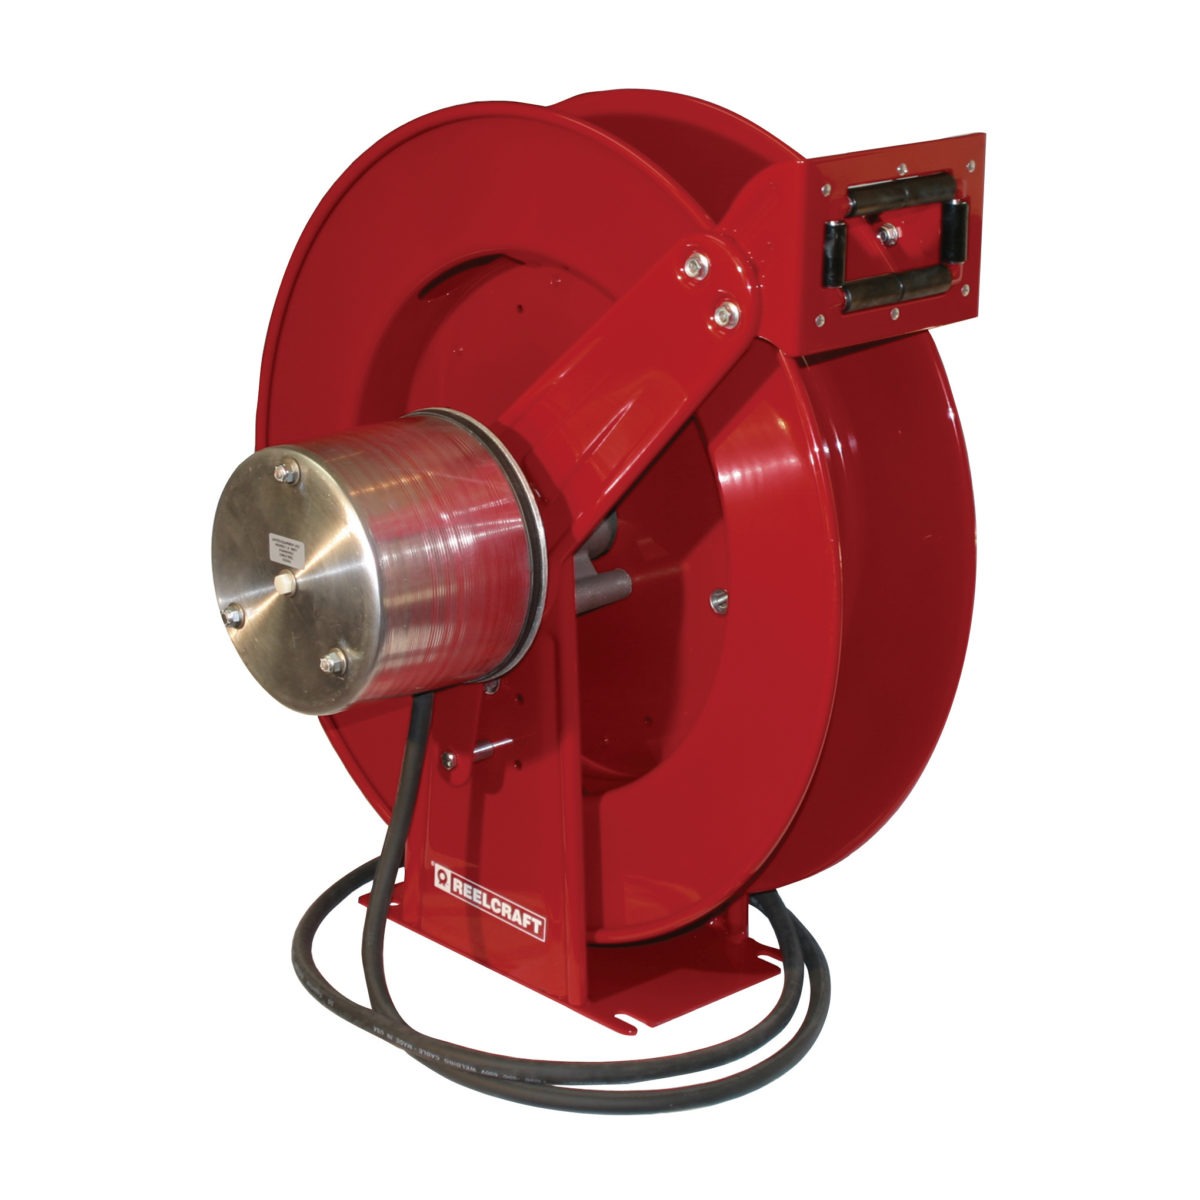 WCH80001 – Ultimate Duty 700 Amp Cable Welding Reel - Hose, Cord and ...